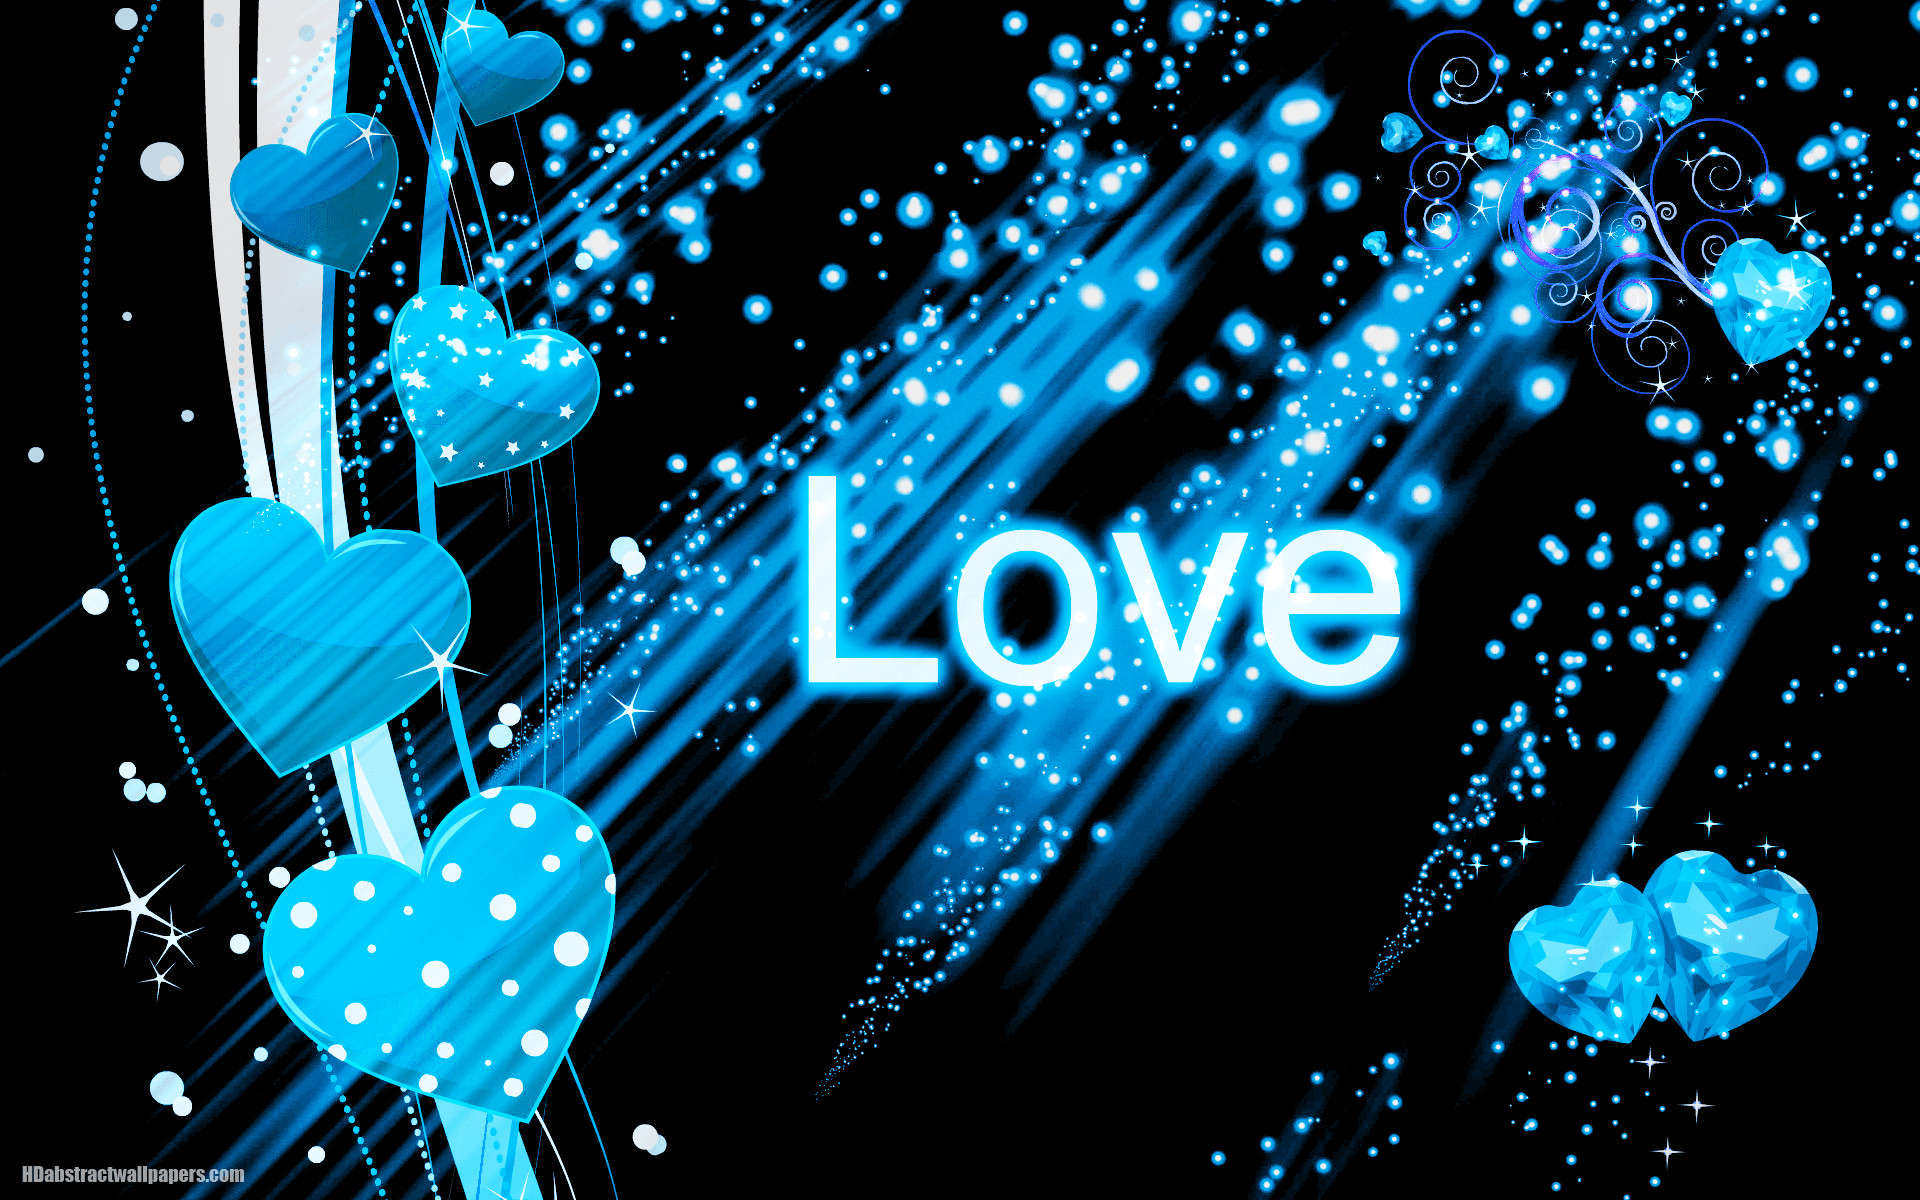 black-abstract-wallpaper-blue-love-hearts-text-love-